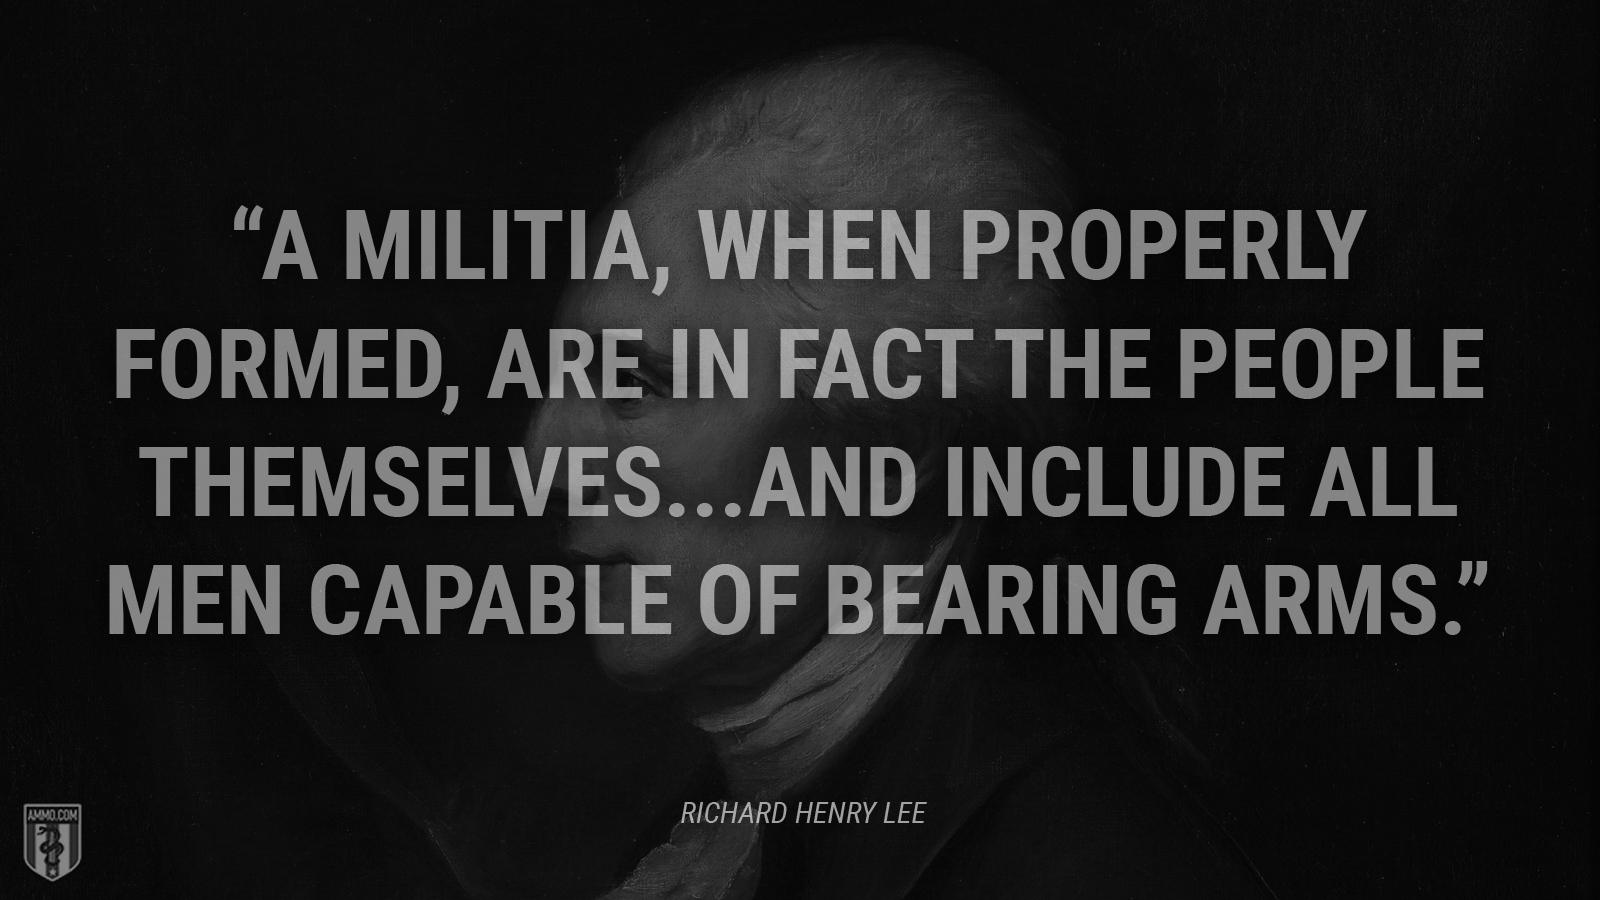 “A militia, when properly formed, are in fact the people themselves...and include all men capable of bearing arms.” - Richard Henry Lee